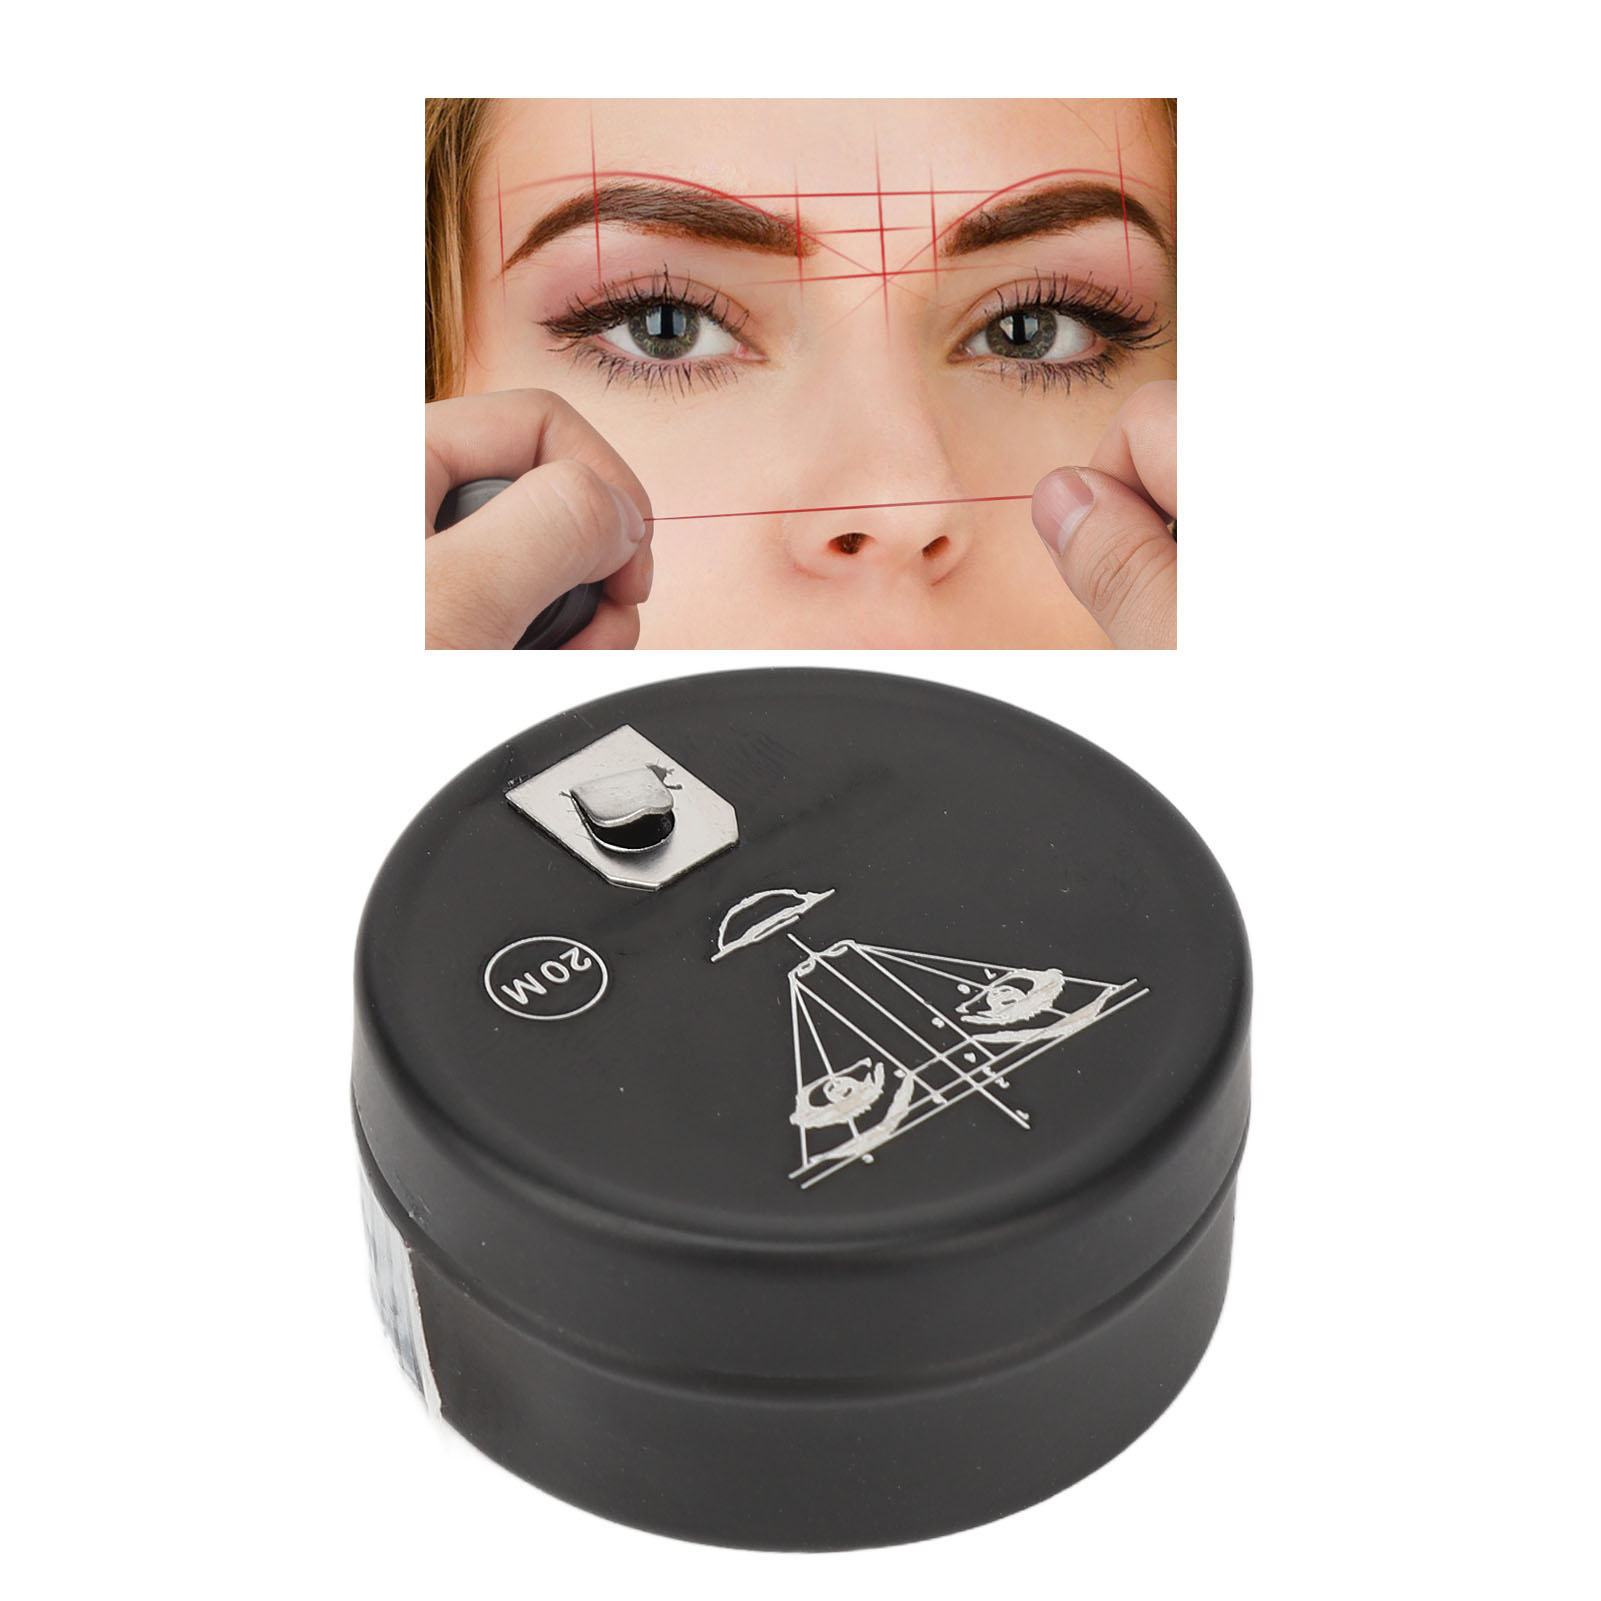 20m Pre-Inked Eyebrow Mapping String, Pre-Inked Microblading